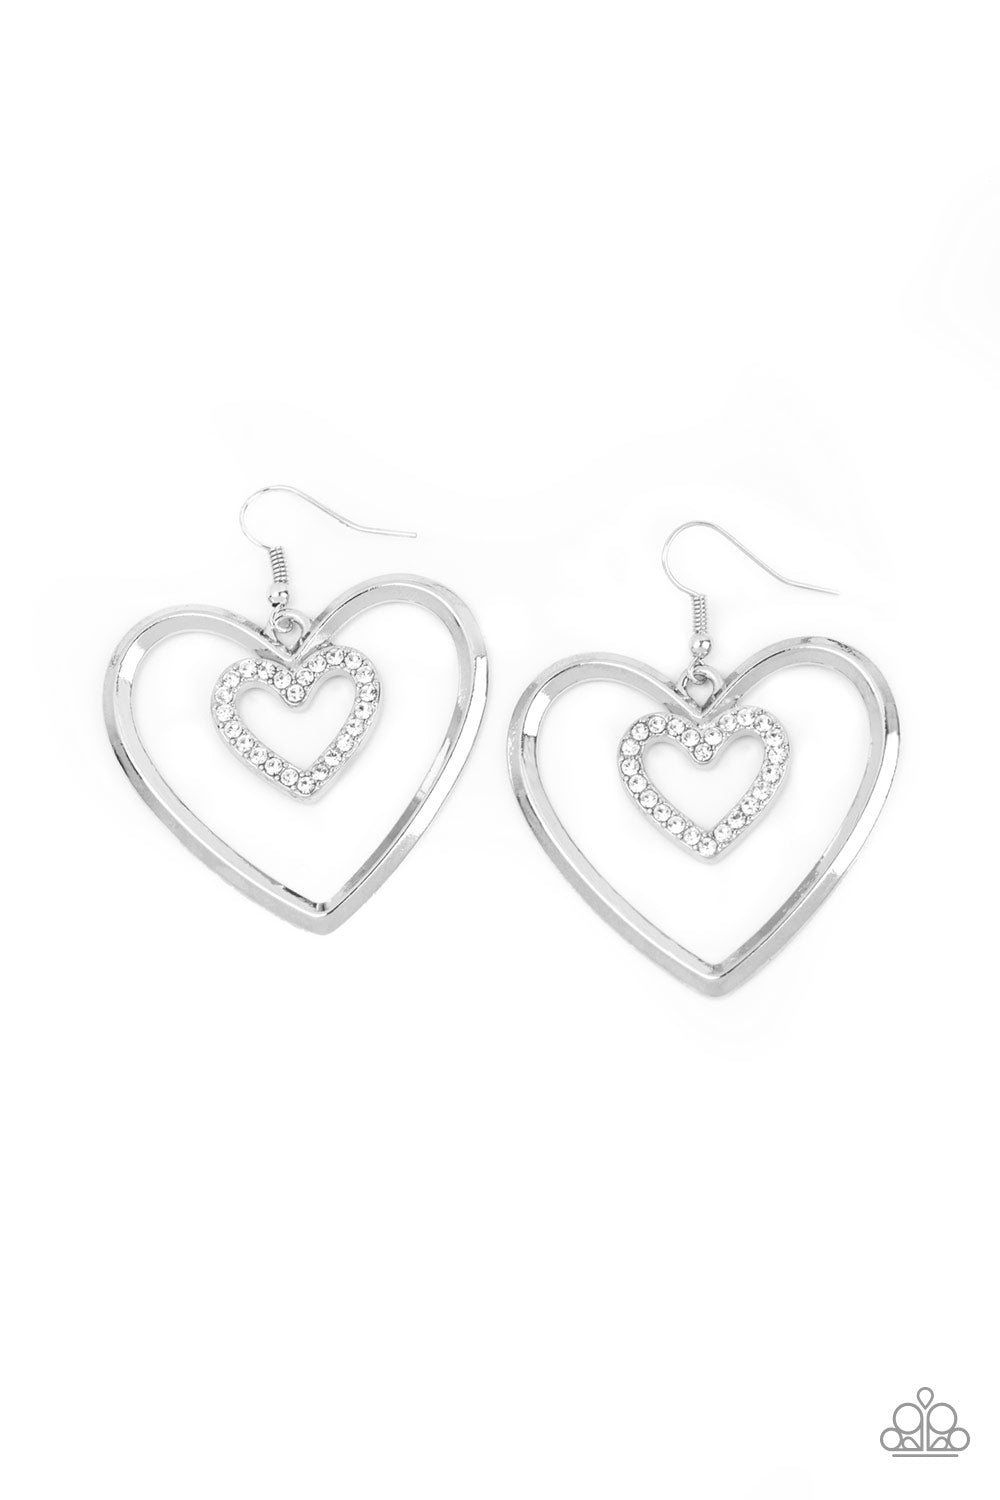 Heart Candy Couture White Paparazzi Earrings Cashmere Pink Jewels - Cashmere Pink Jewels & Accessories, Cashmere Pink Jewels & Accessories - Paparazzi